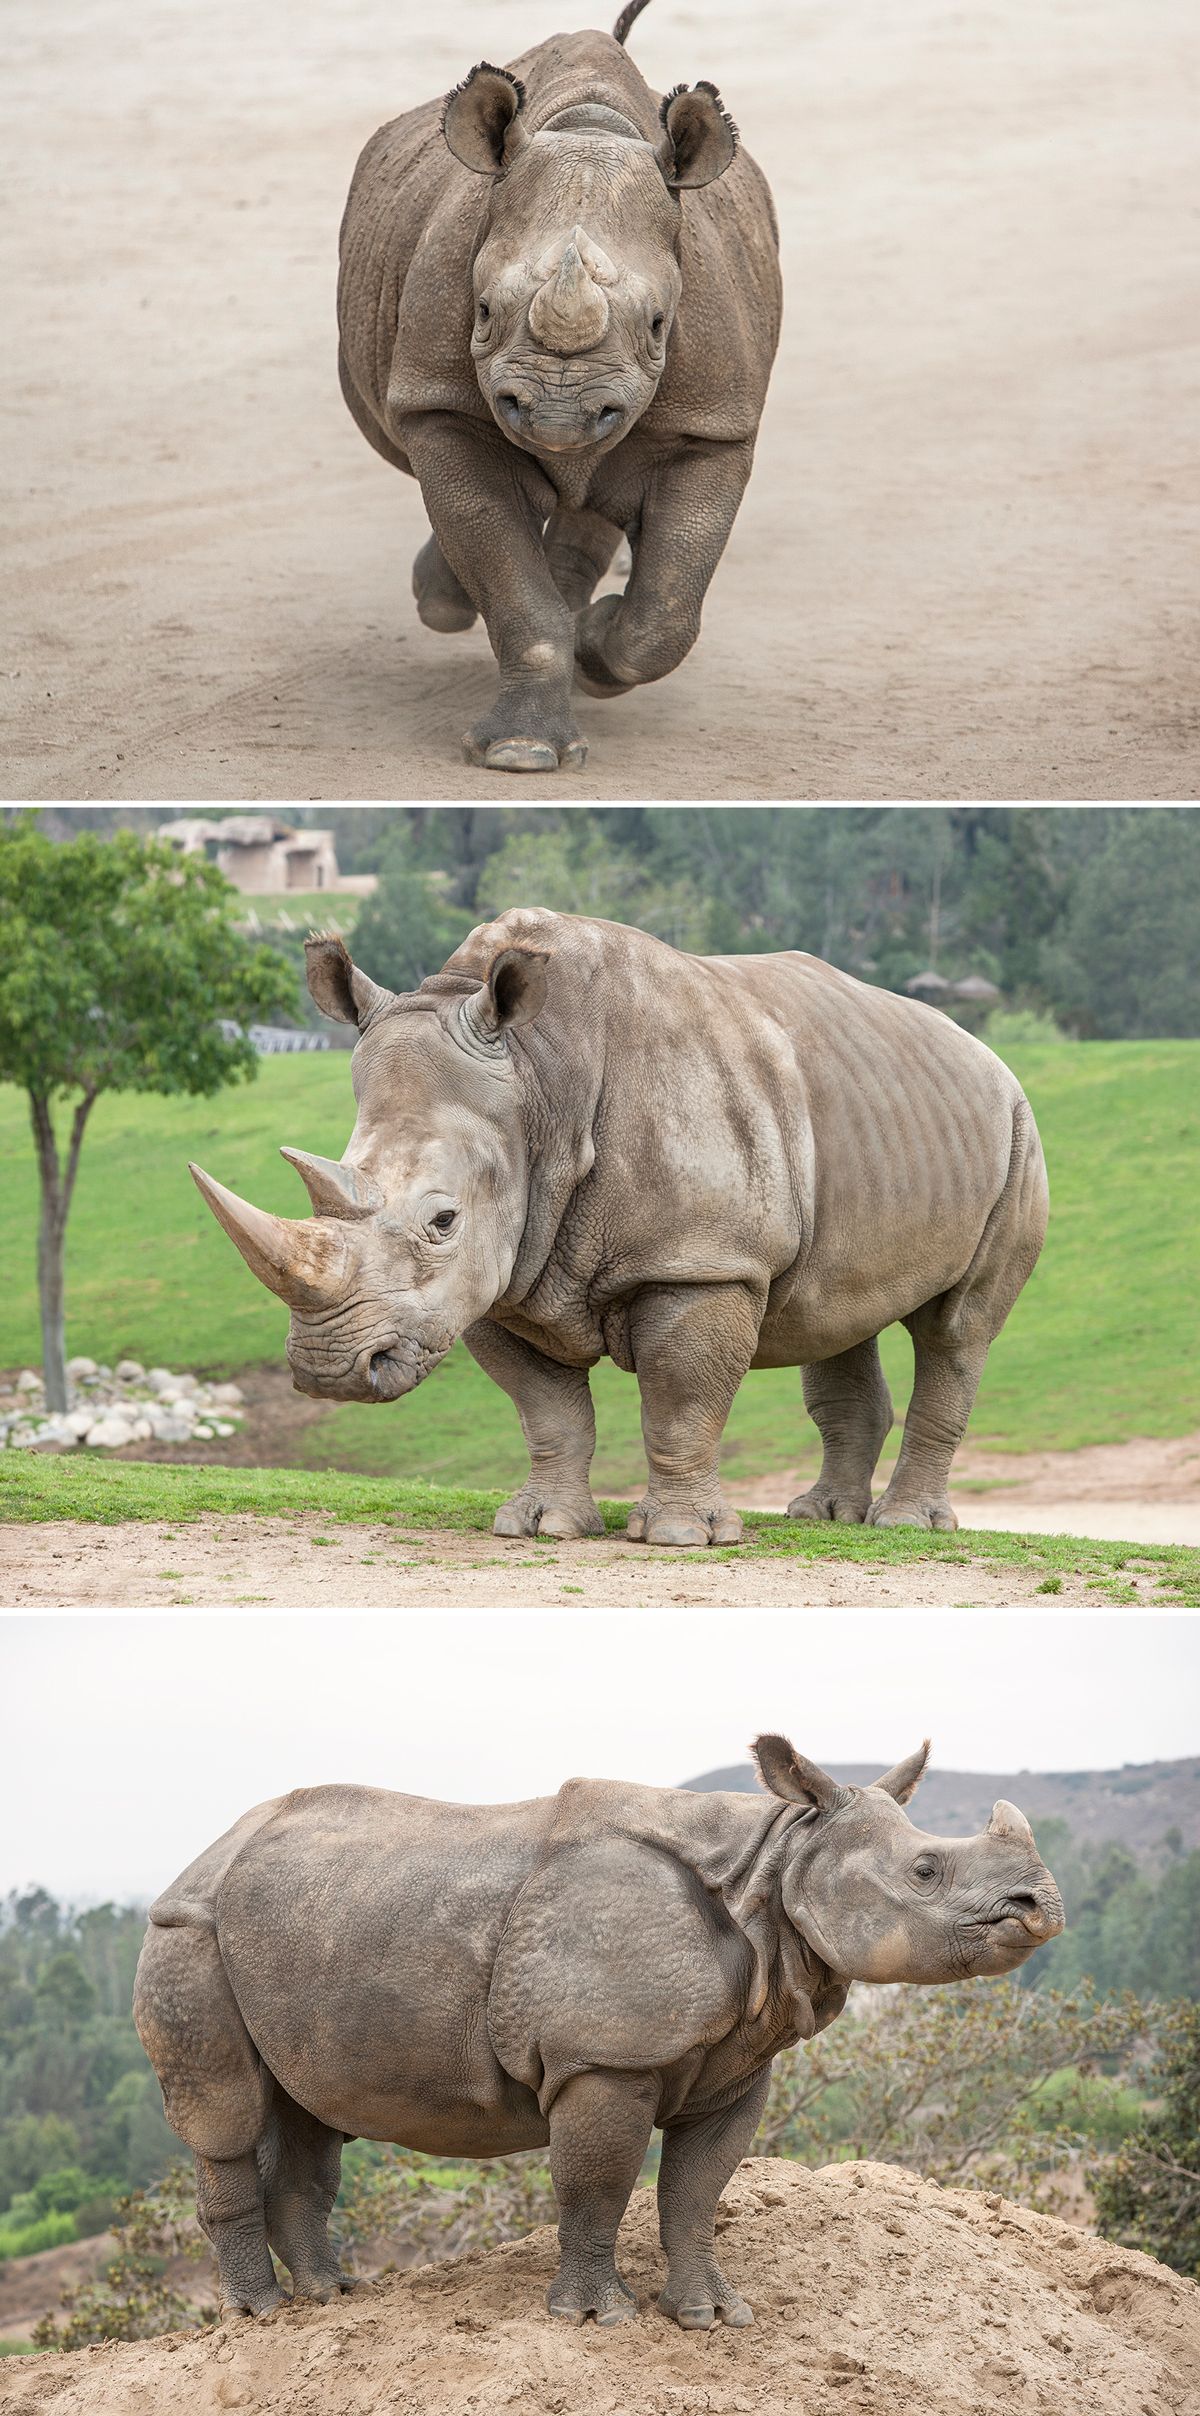 Is the rhino the second largest land mammal?